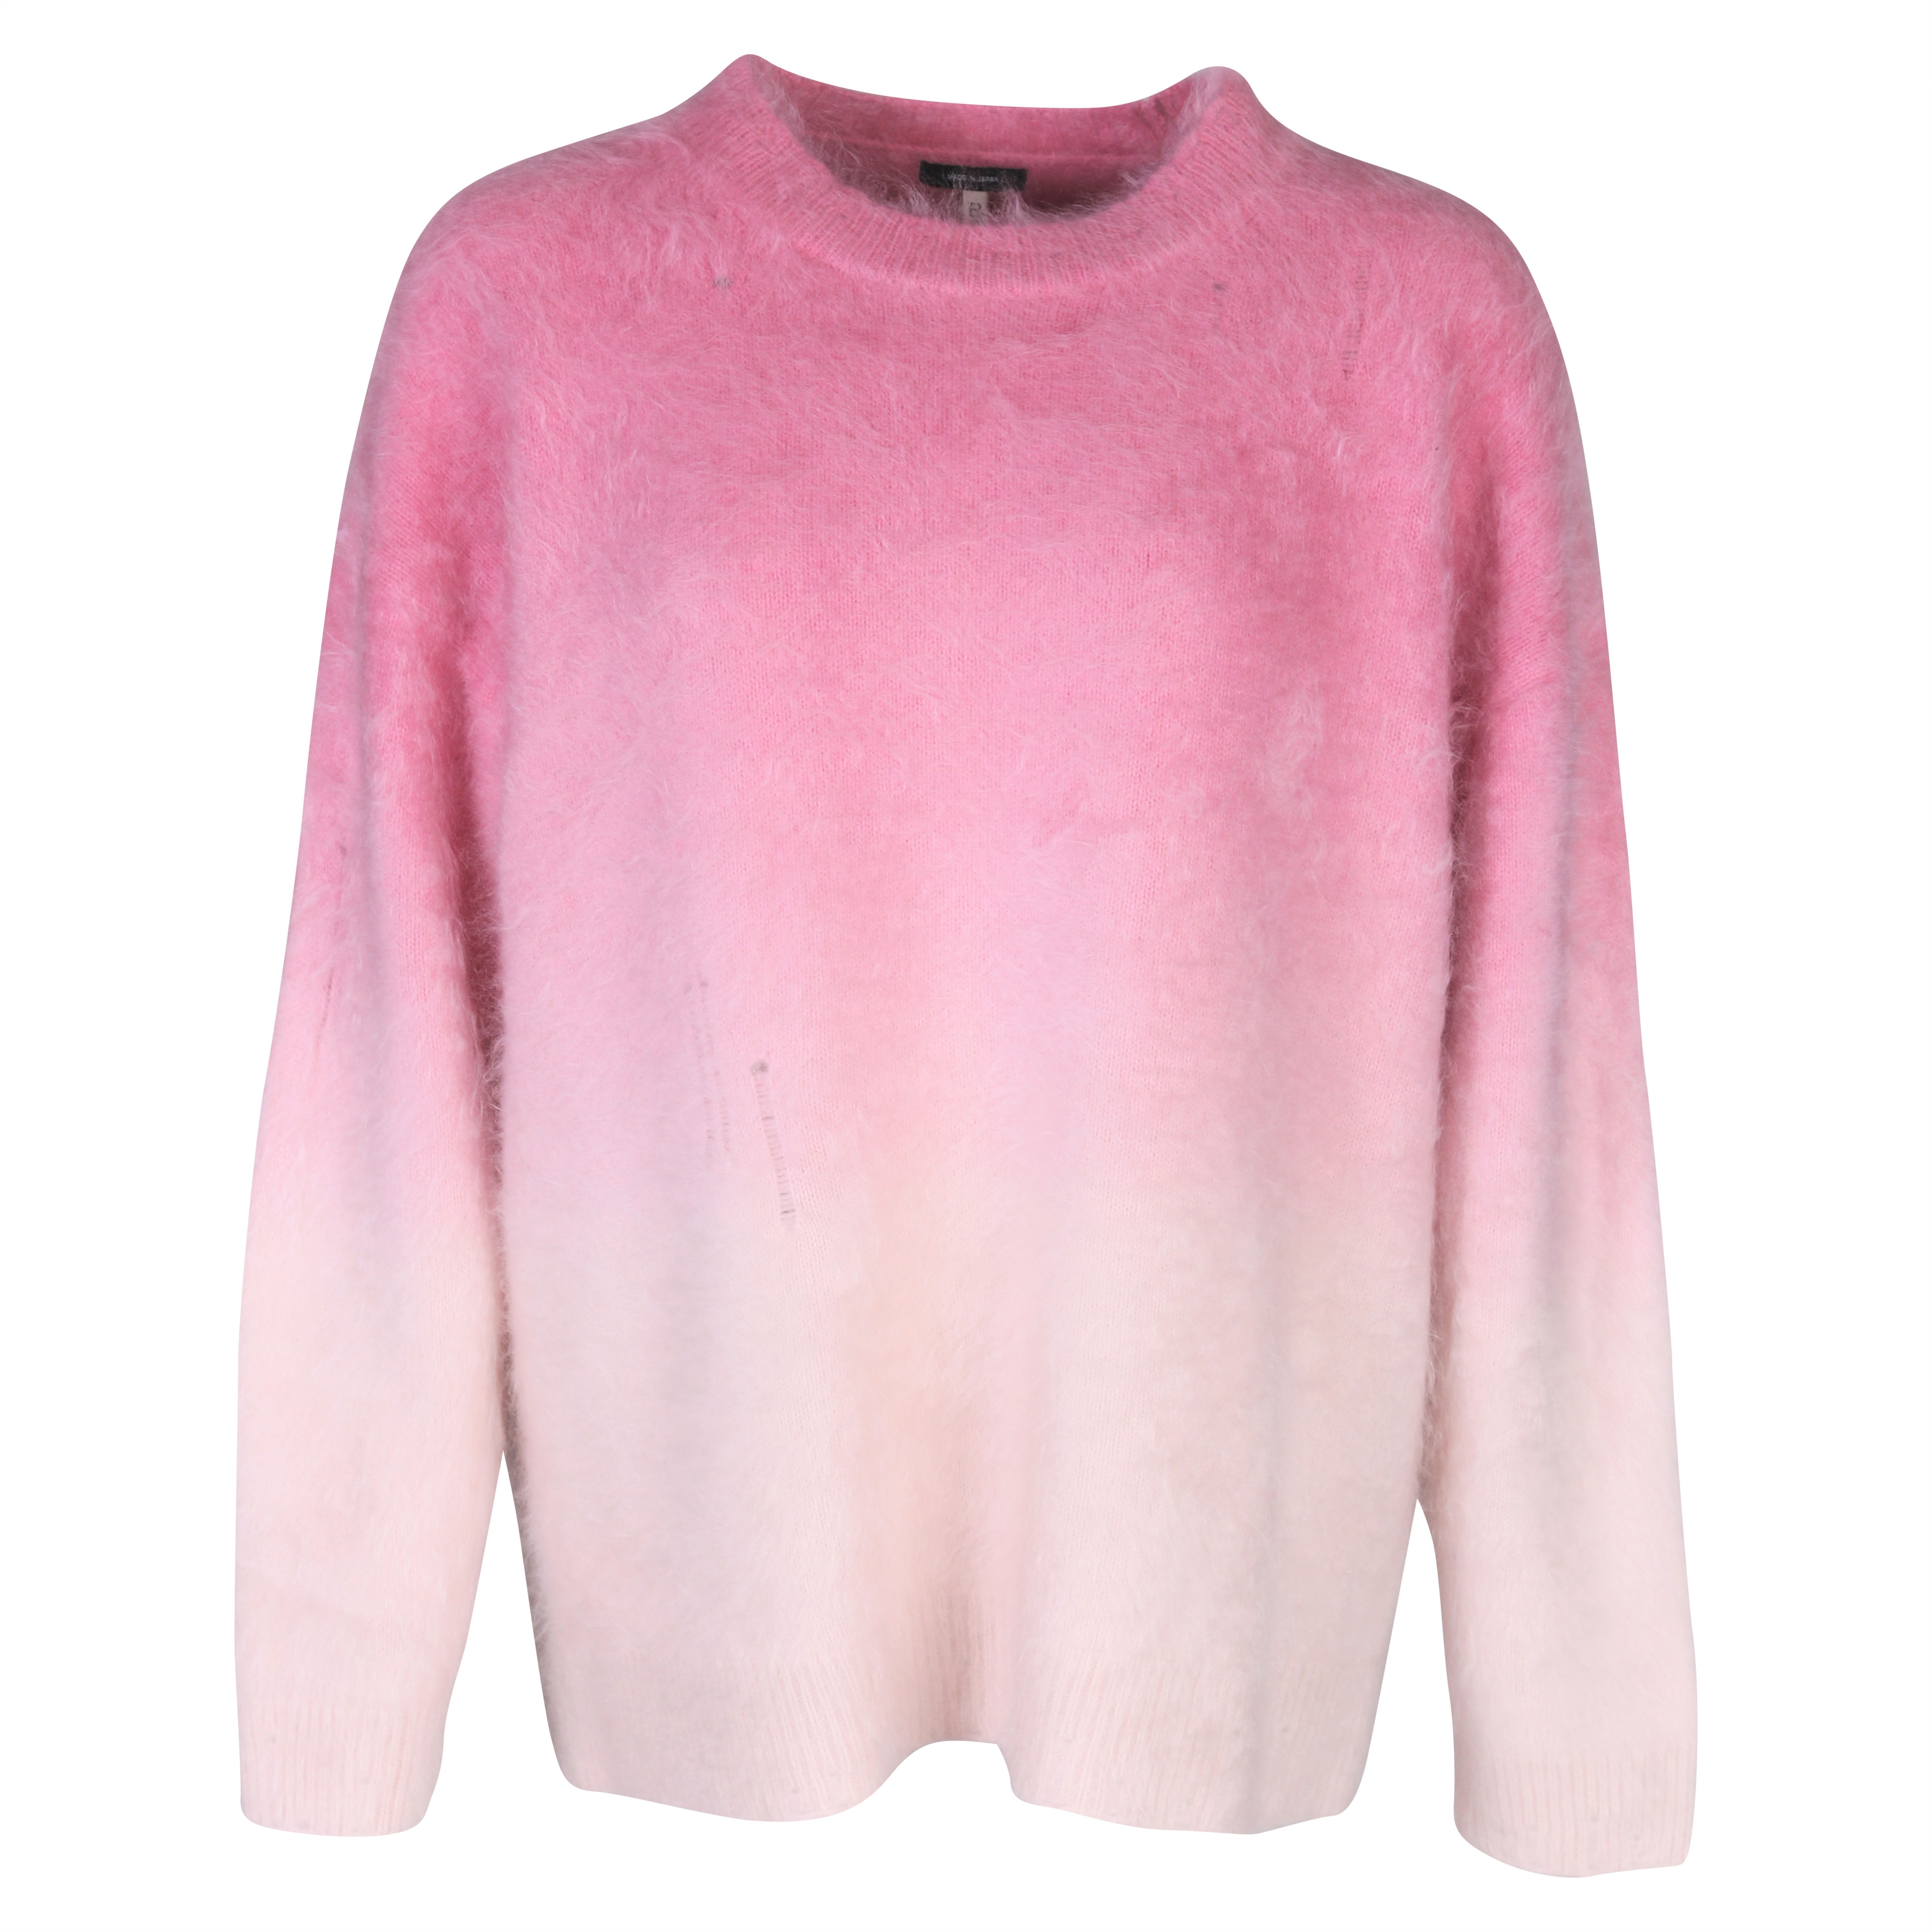 R13 Japanese Brushed Cashmere Dip Dye Sweater in Pink